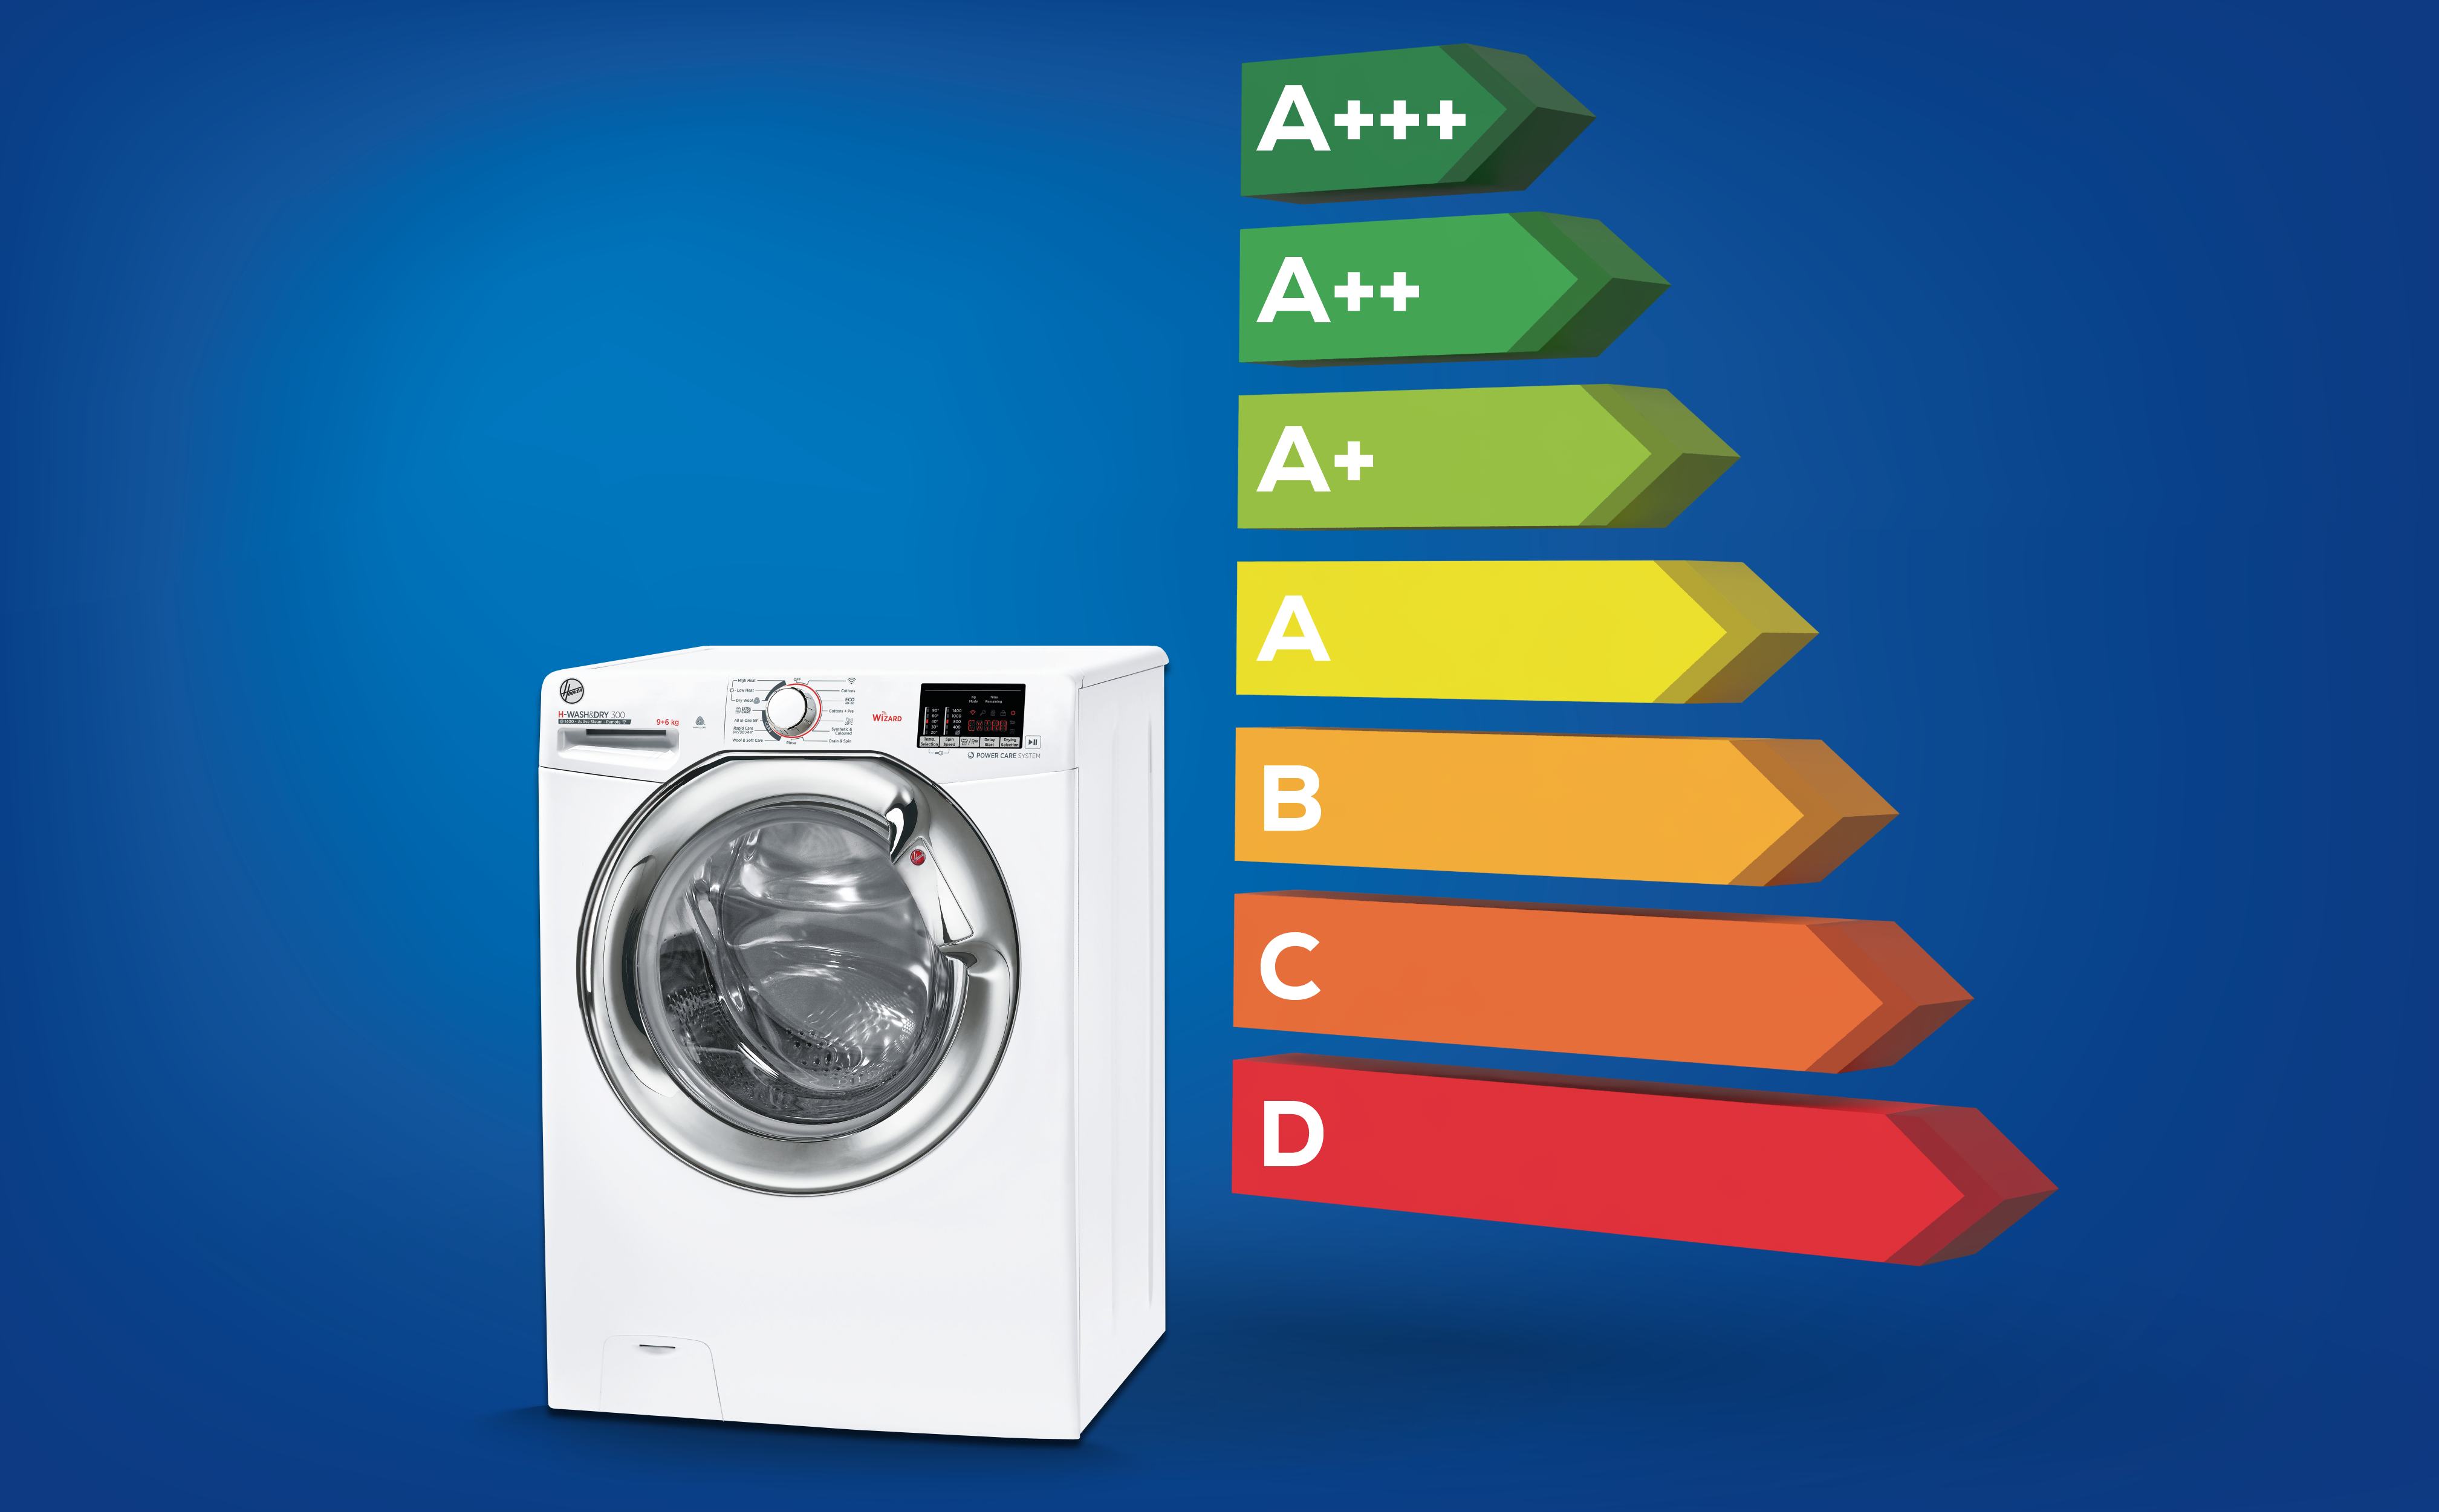 Washer dryer with energy labels